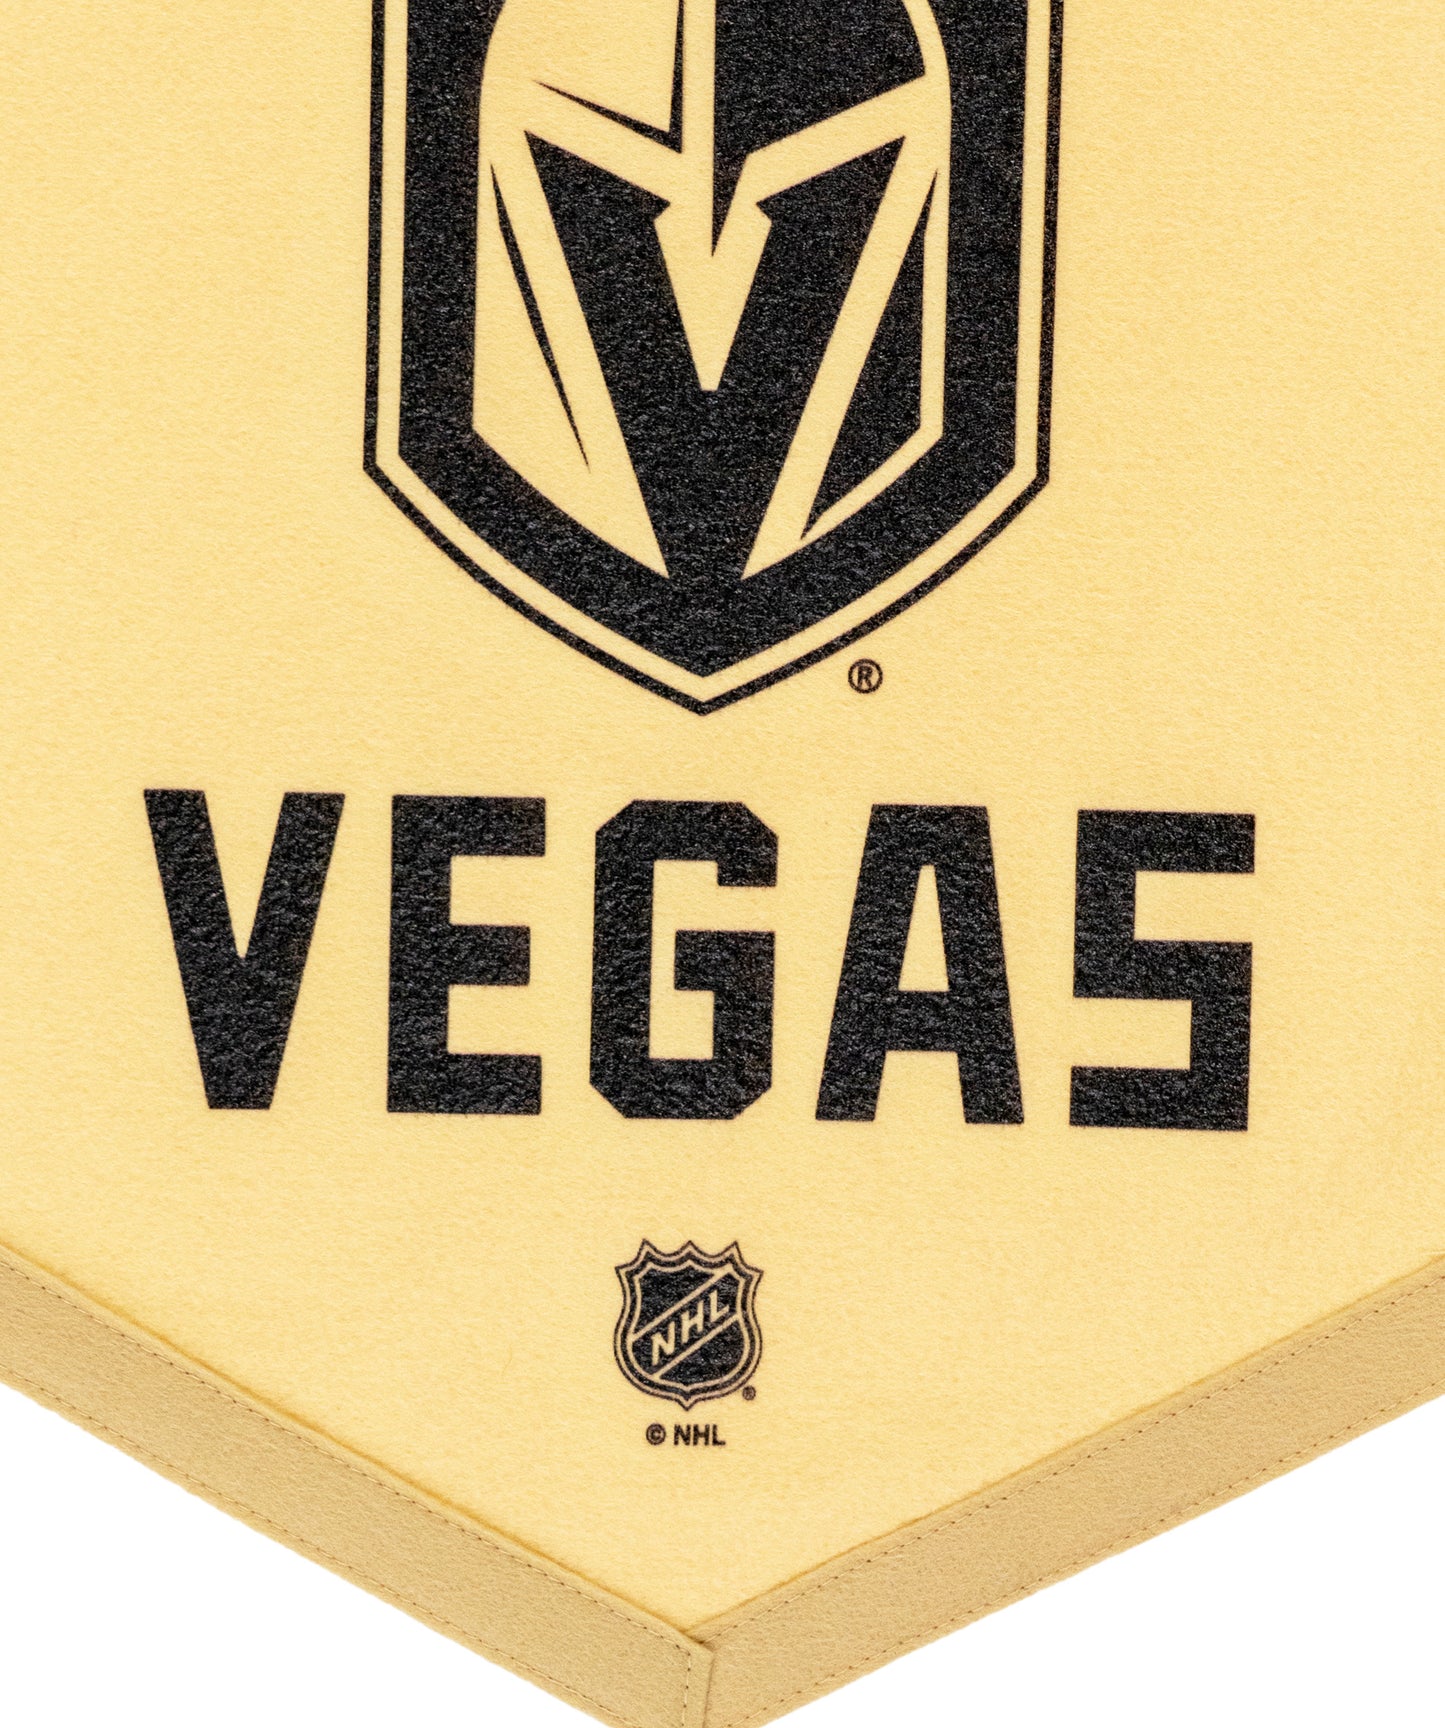 Made In Vegas: Vegas Golden Knights Camp Flag • NHL x Oxford Pennant